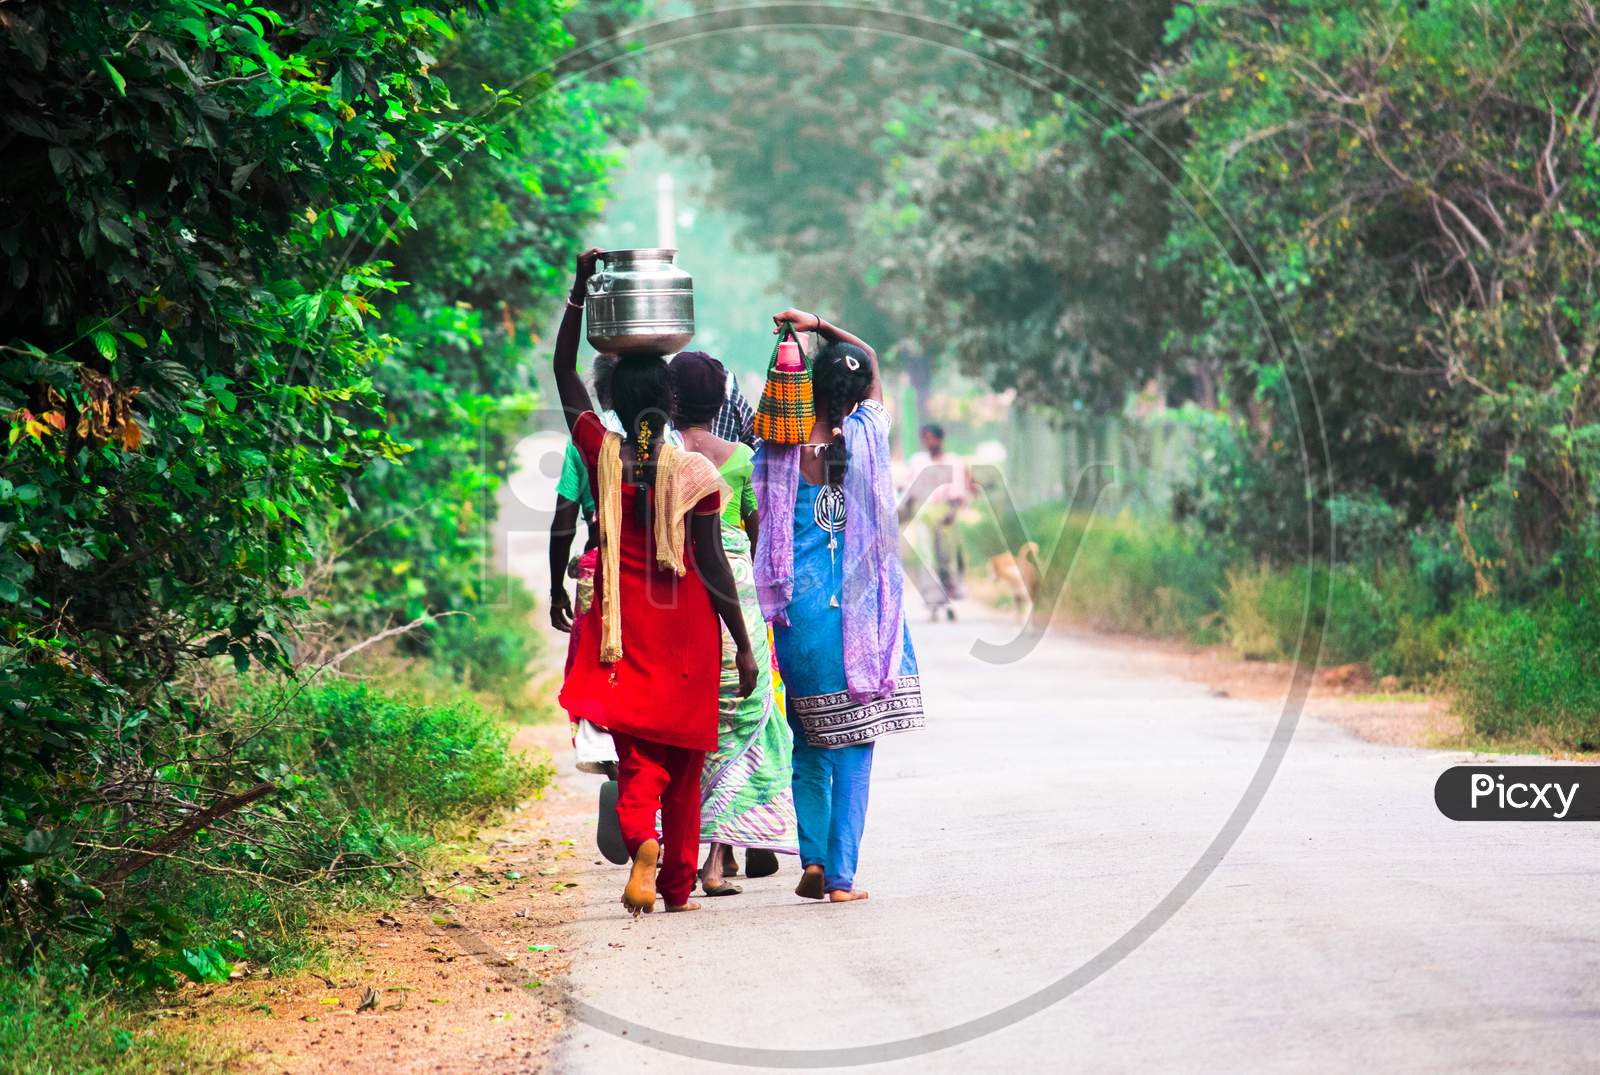 Rural Village Girls Carrying Water Vessels over Head